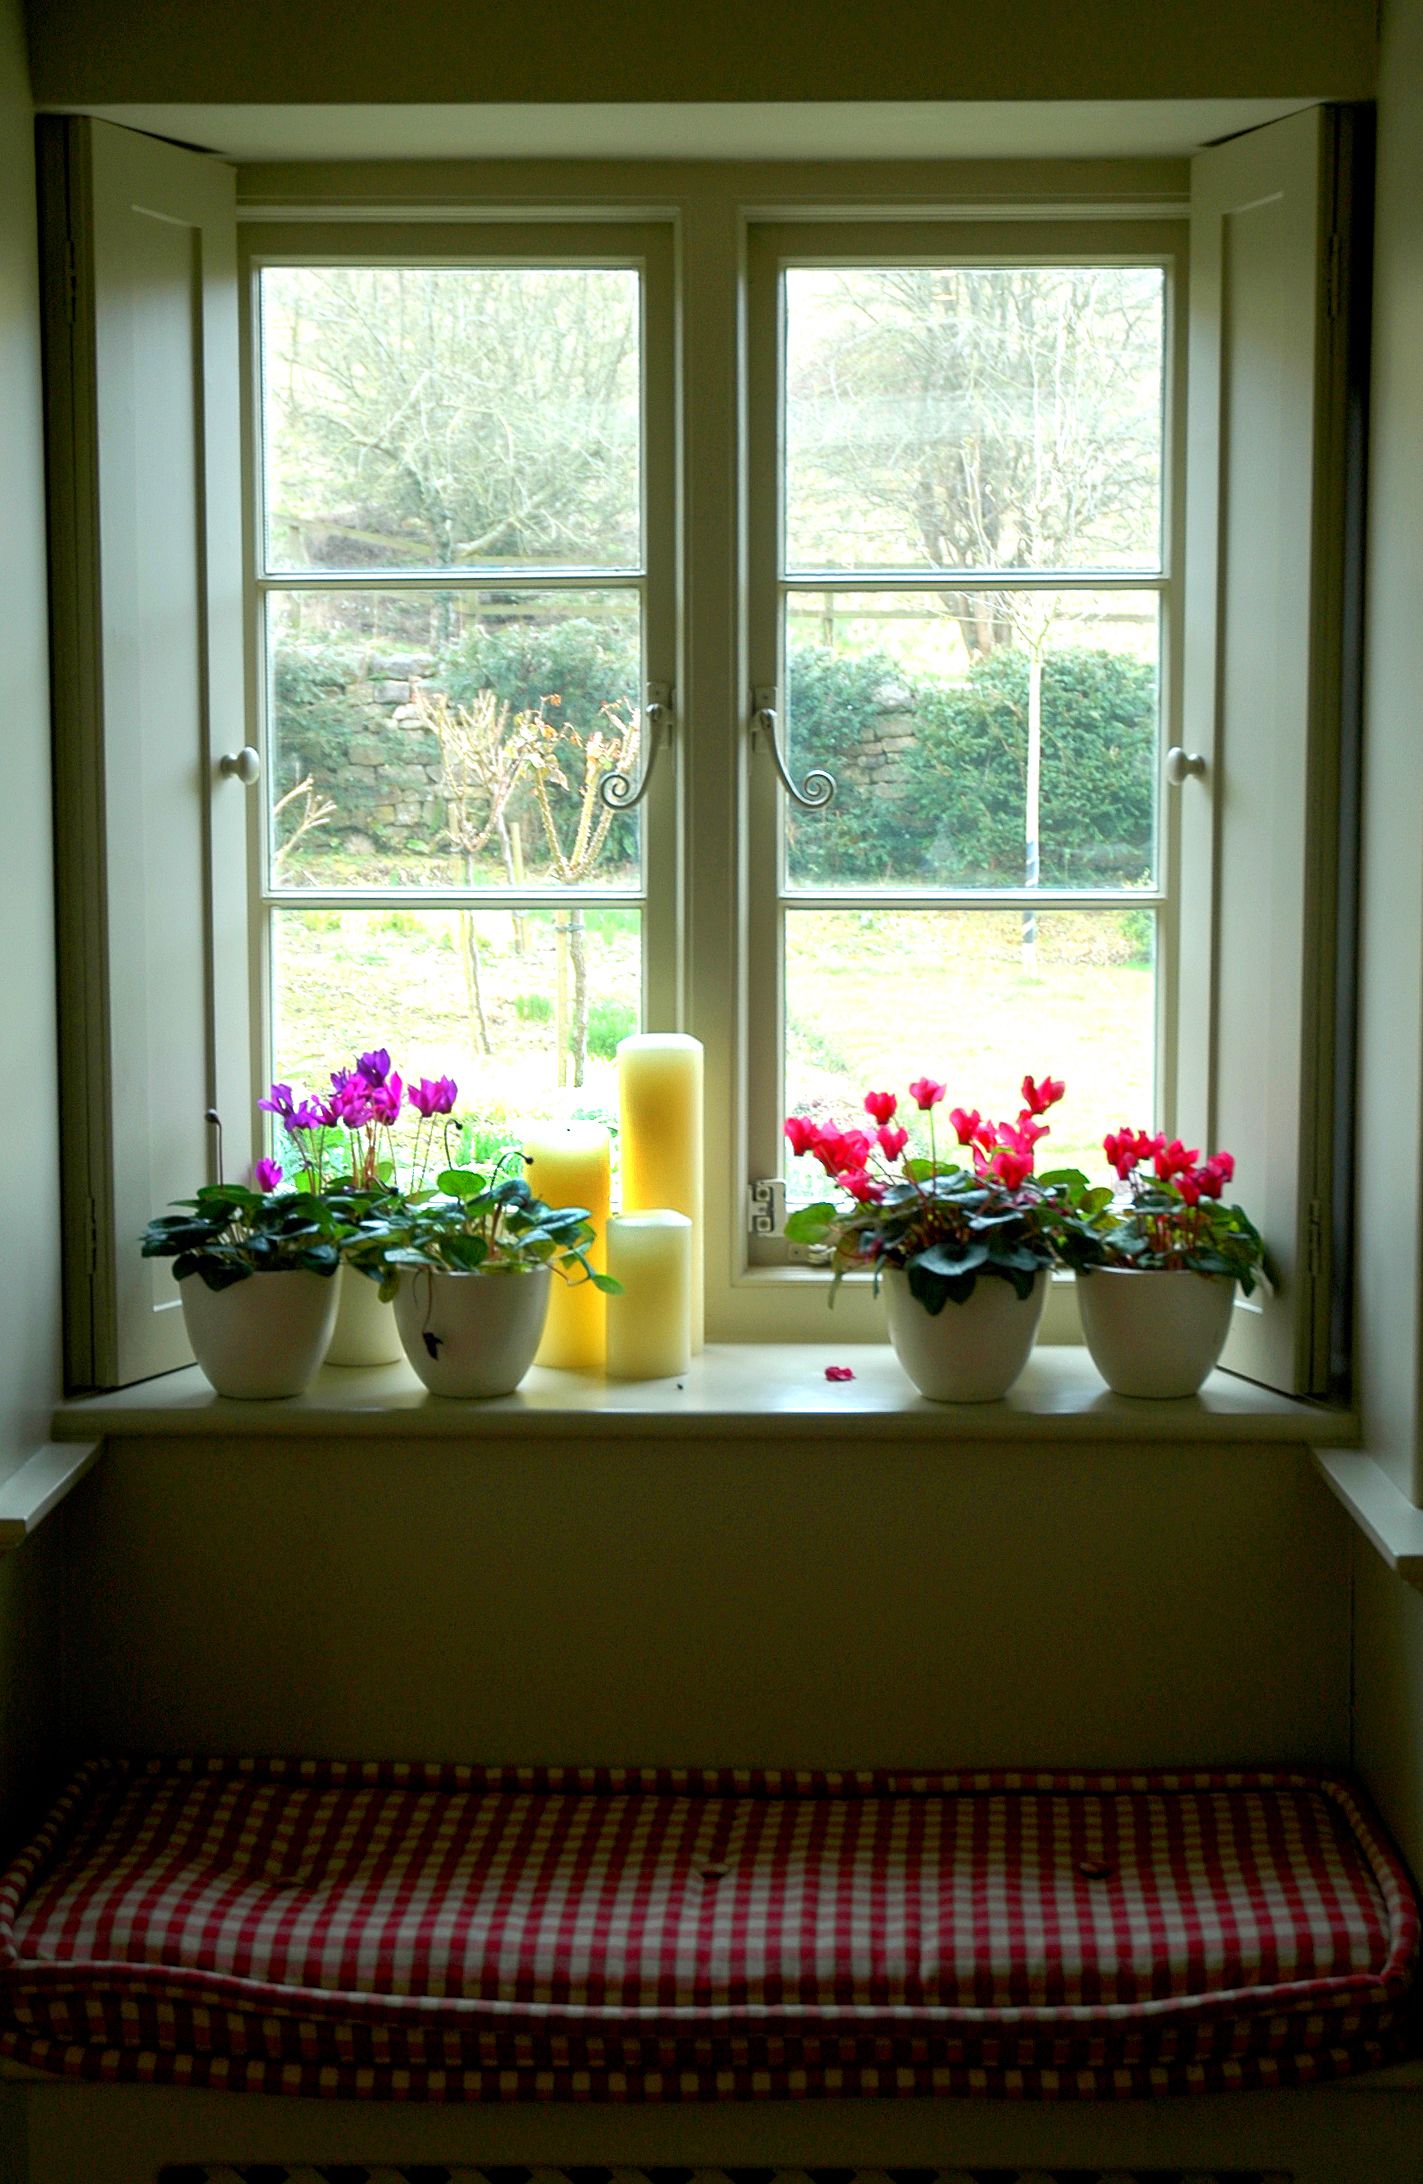 An English Country House Window | House windows, English country ...